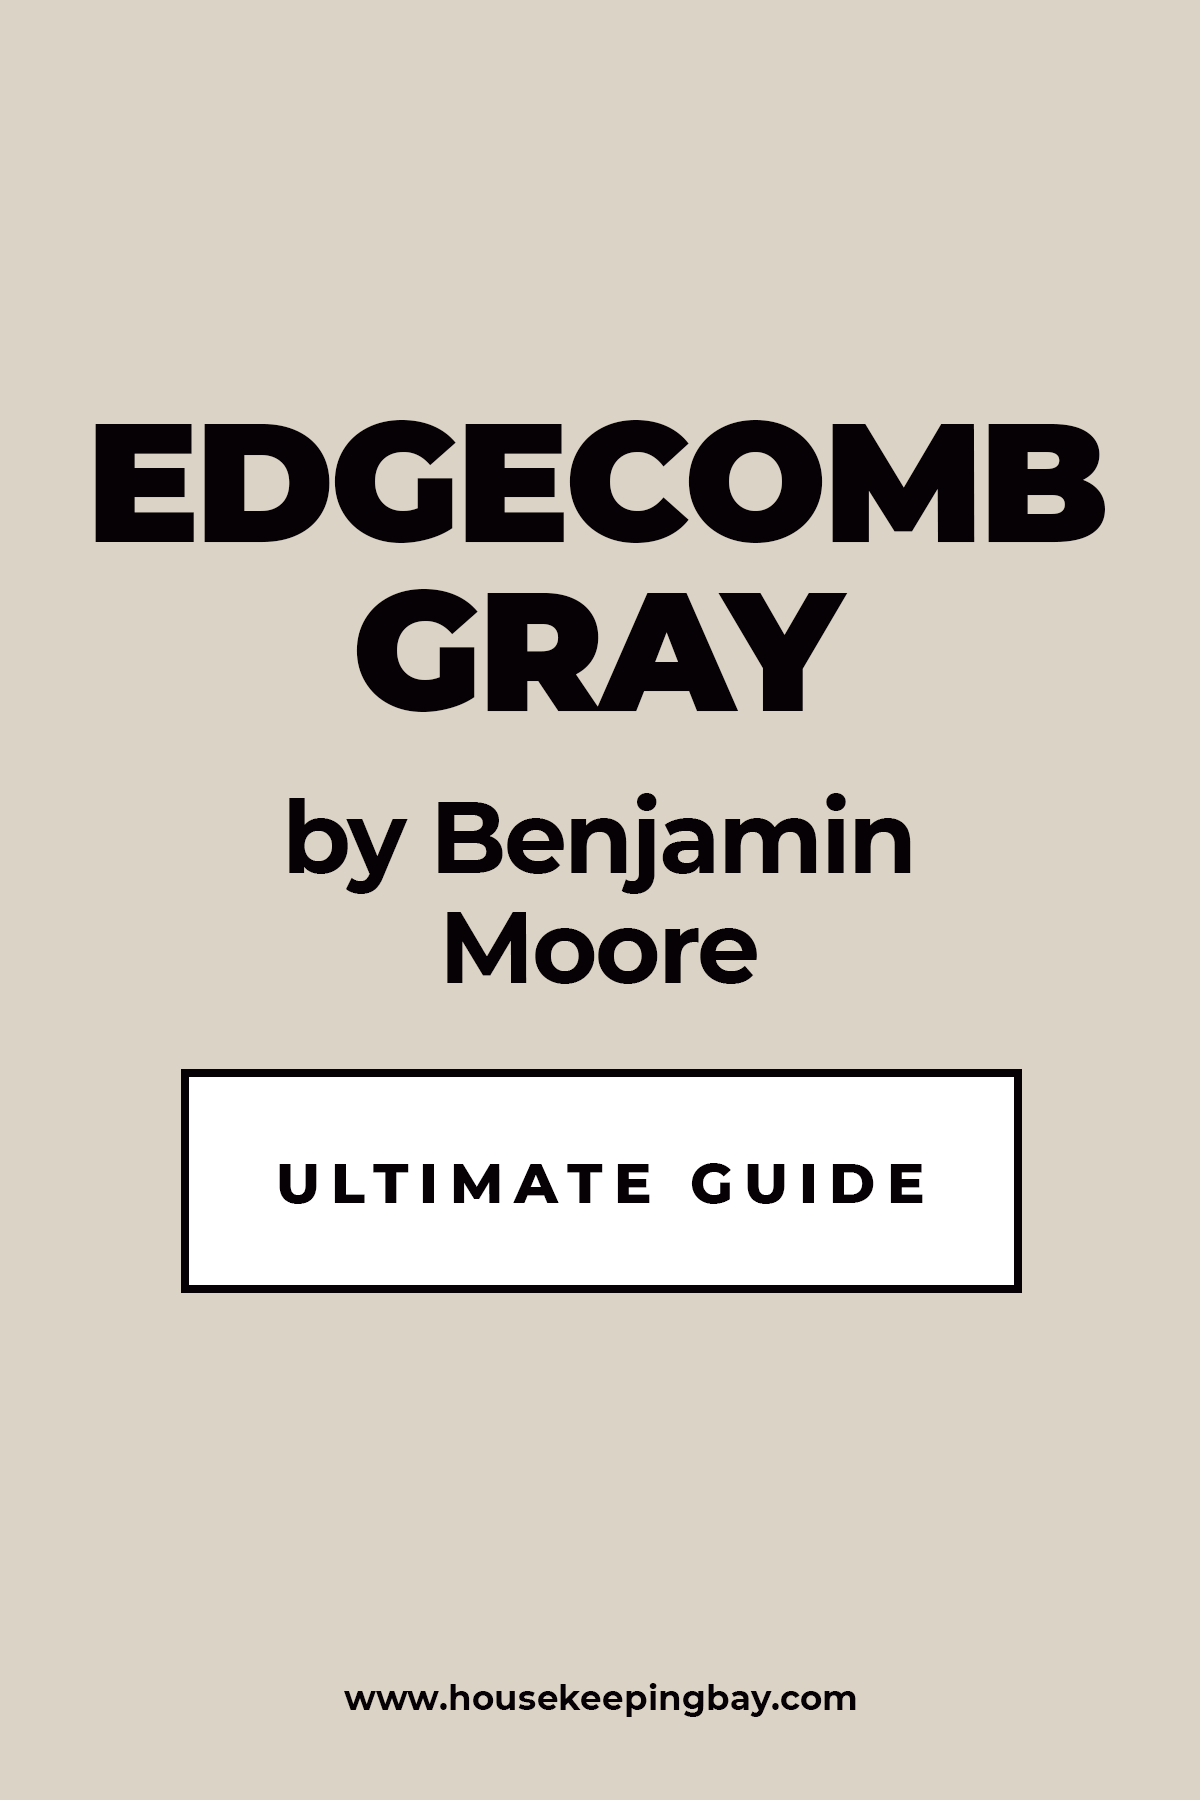 Edgecomb Gray by Benjamin Moore ULTIMATE GUIDE